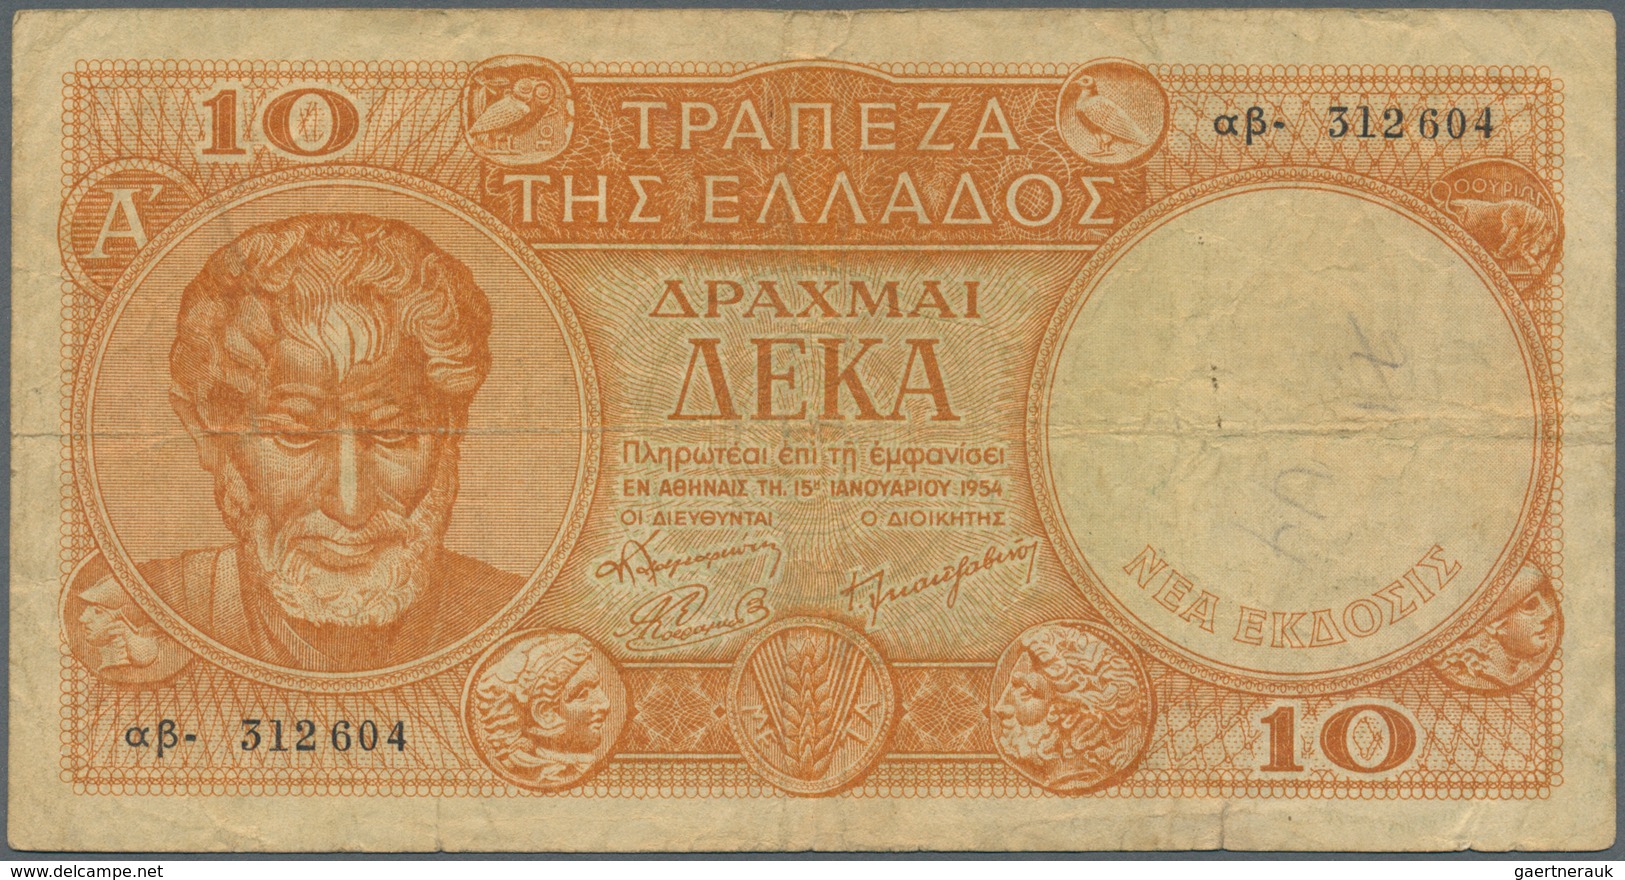 Greece / Griechenland: 10 Drachmai 1954 P. 186a, Used With Several Folds, Stained Paper, Small Pen W - Griechenland